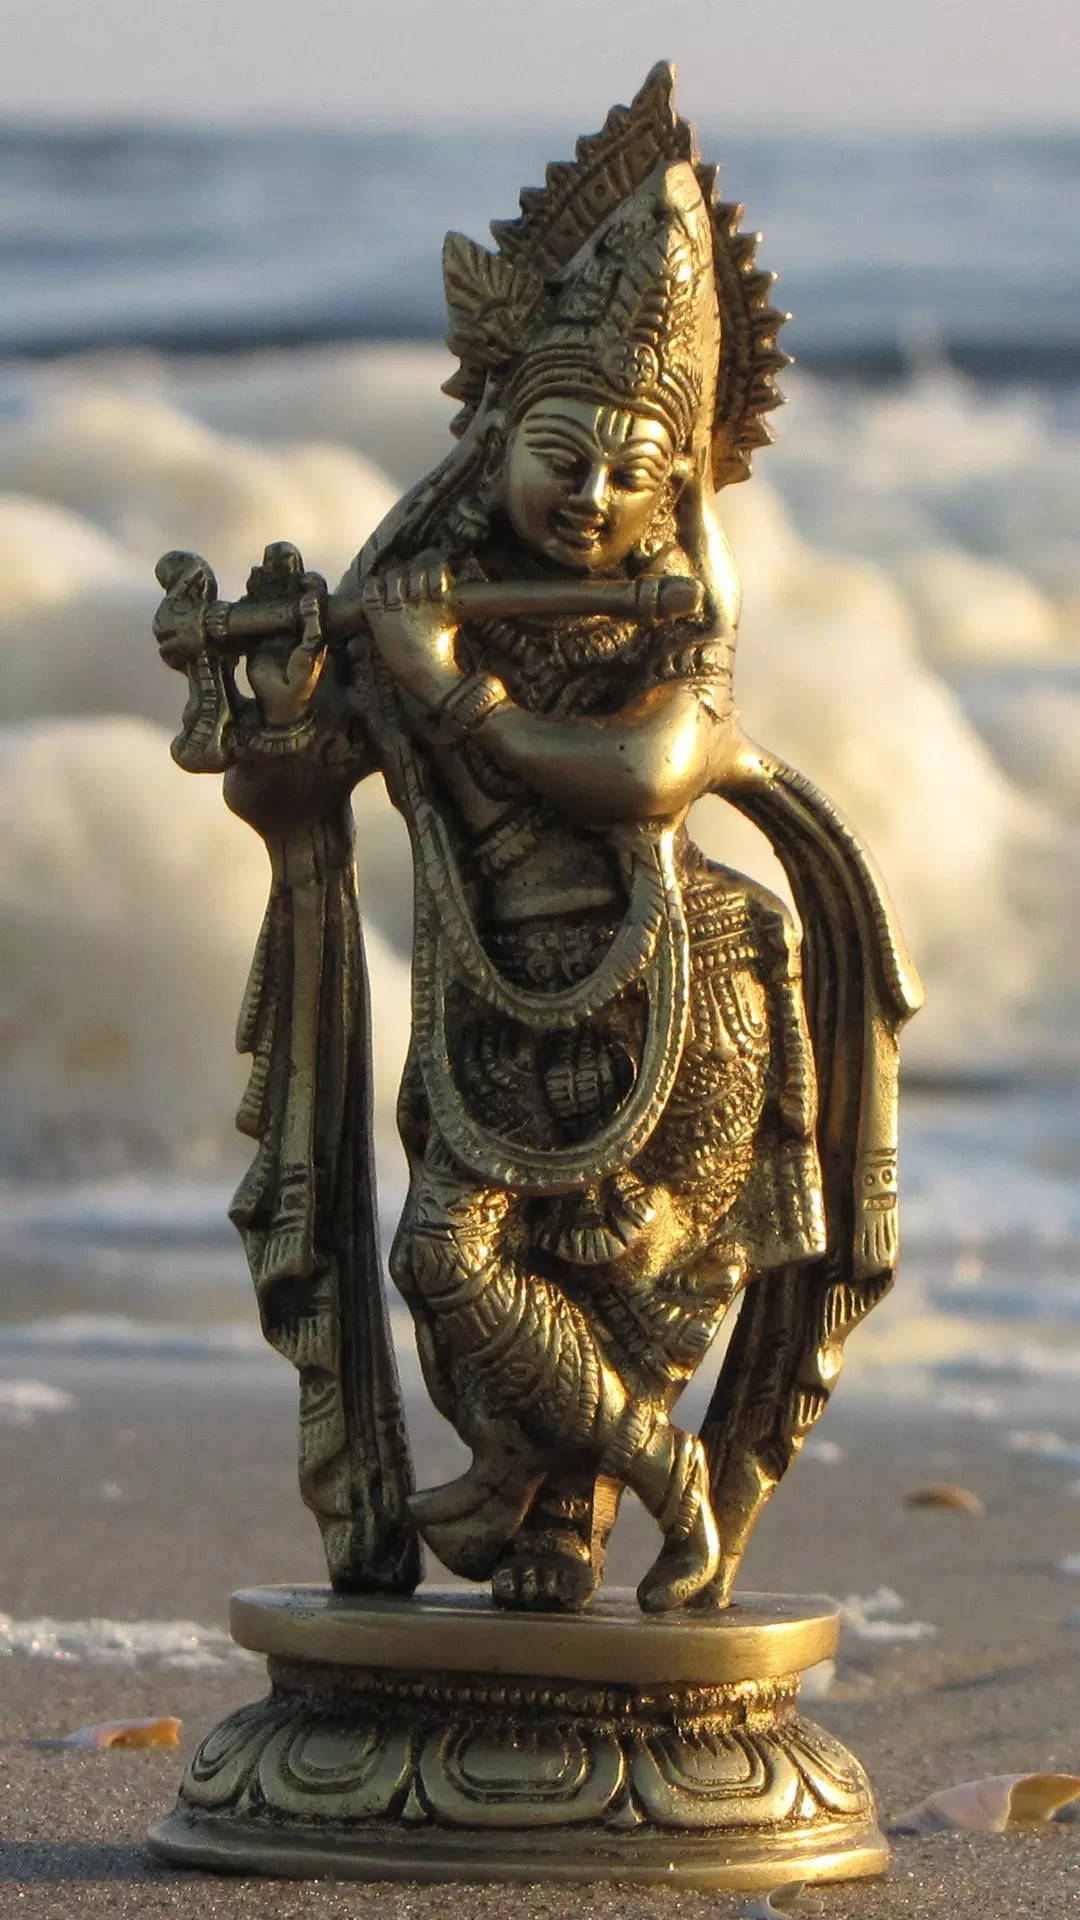 Krishnahd Guldfärgad Staty - This Would Be A Suitable Description For A Computer Or Mobile Wallpaper Featuring An Image Of A Gold Statue Of The Hindu Deity Krishna In High Definition Quality. Wallpaper